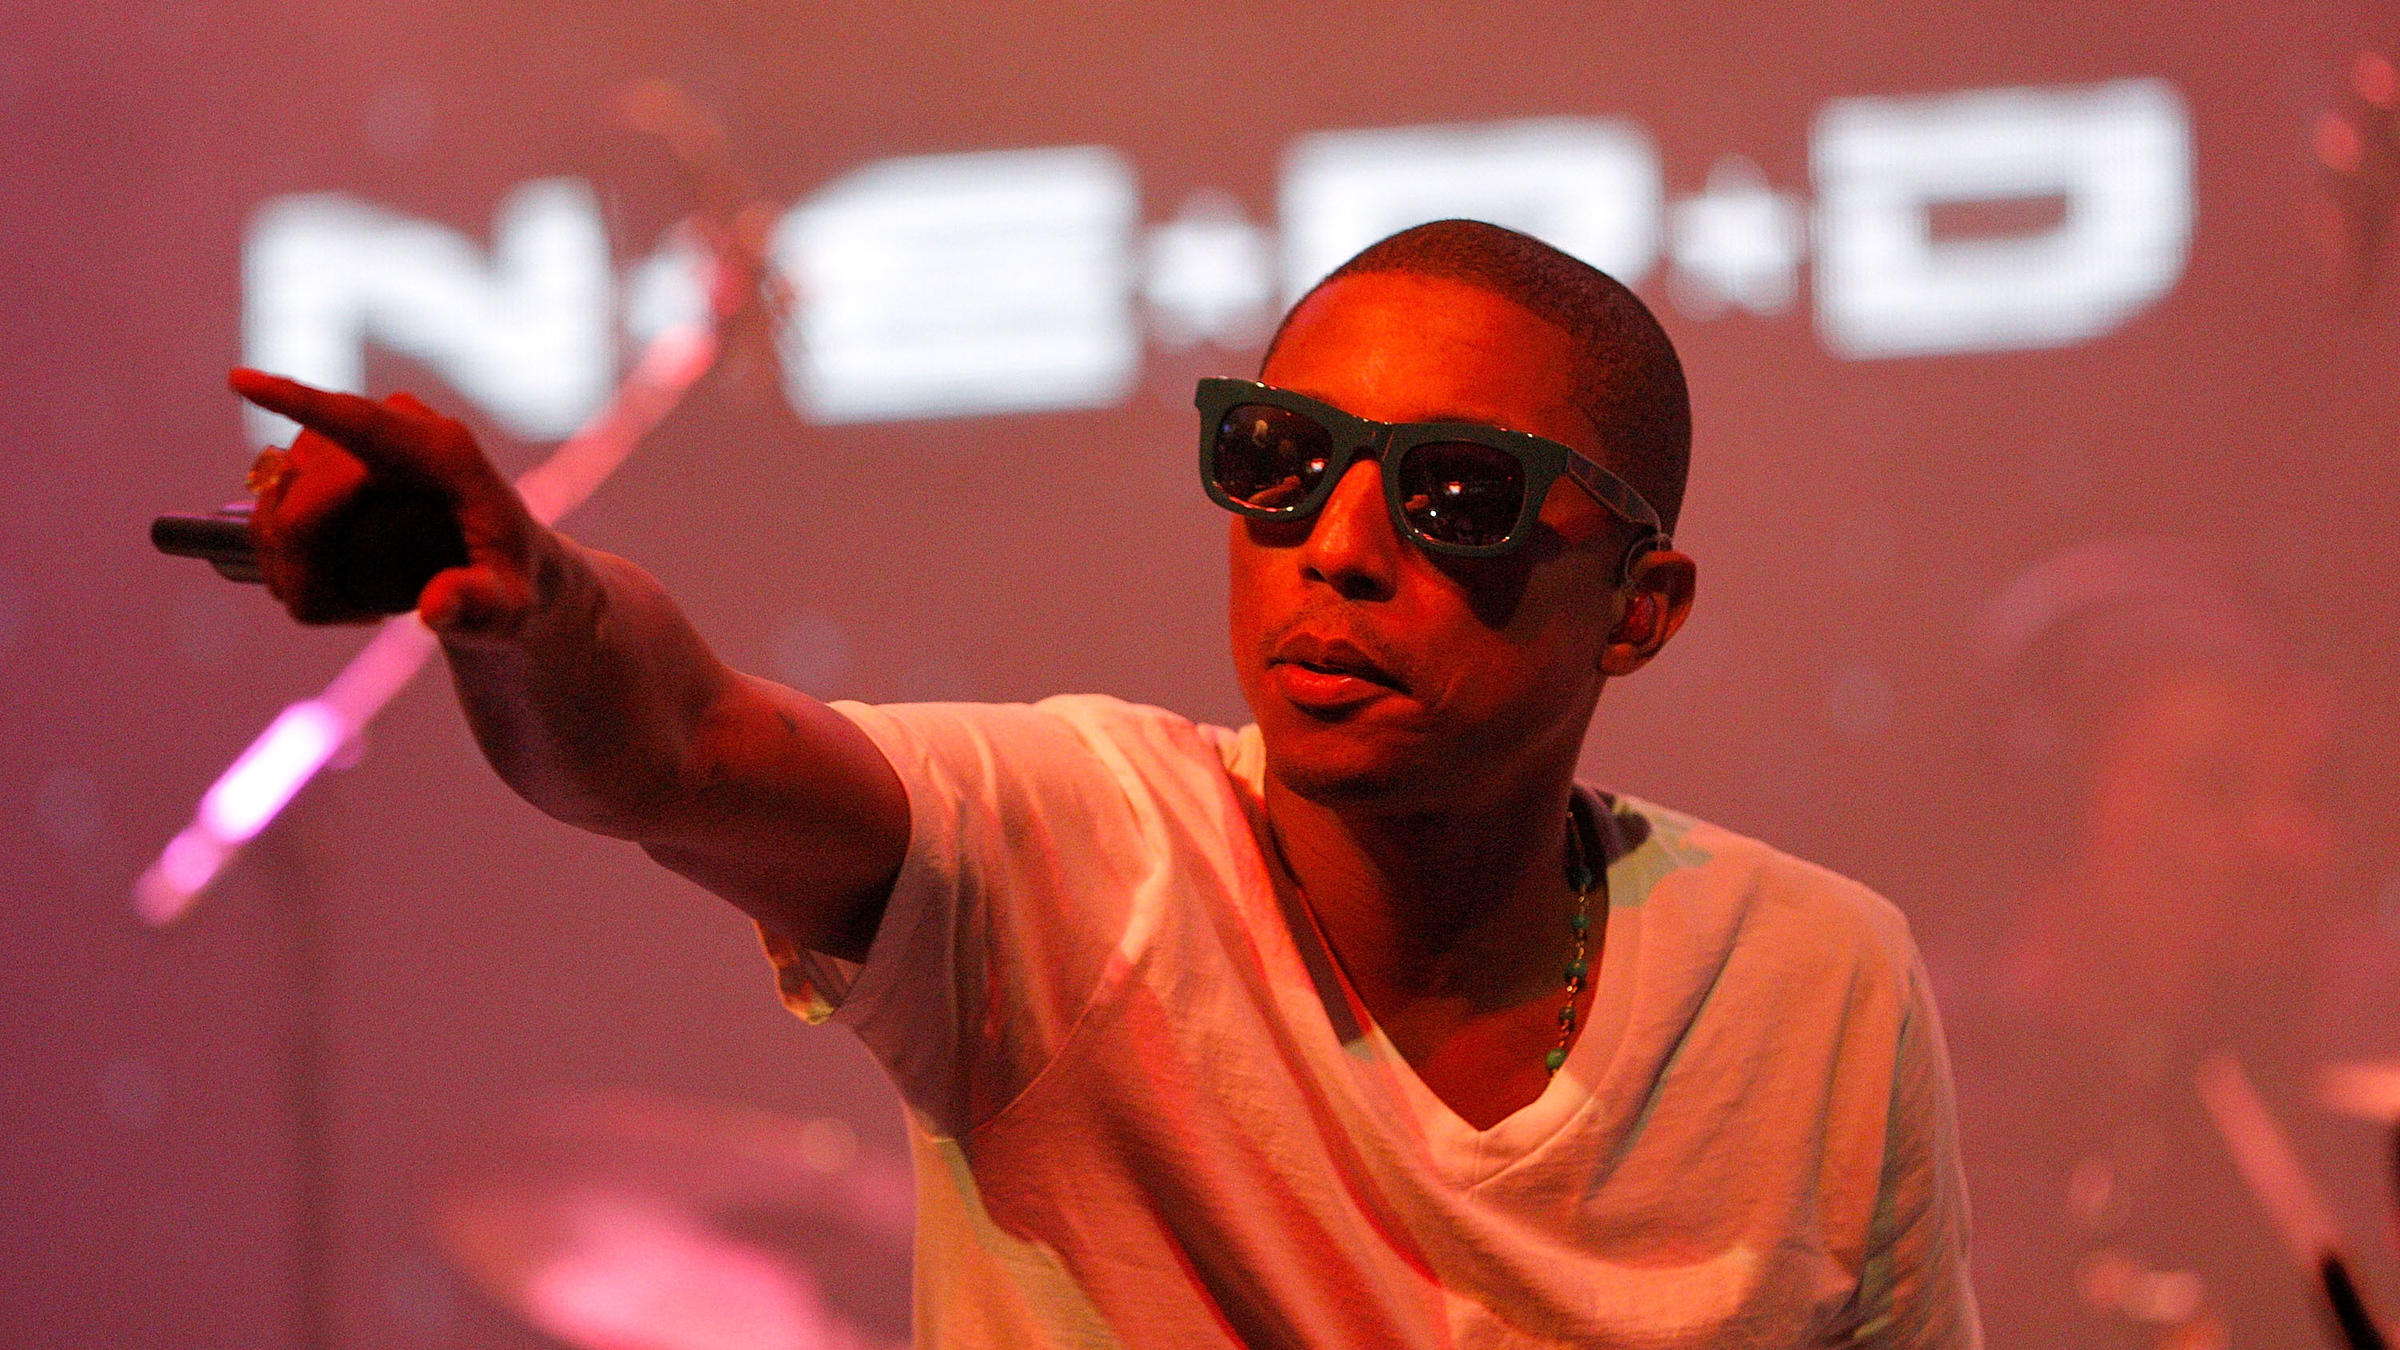 Pharrell Addresses The Killing Of Keith Scott By Police On New N.E.R.D